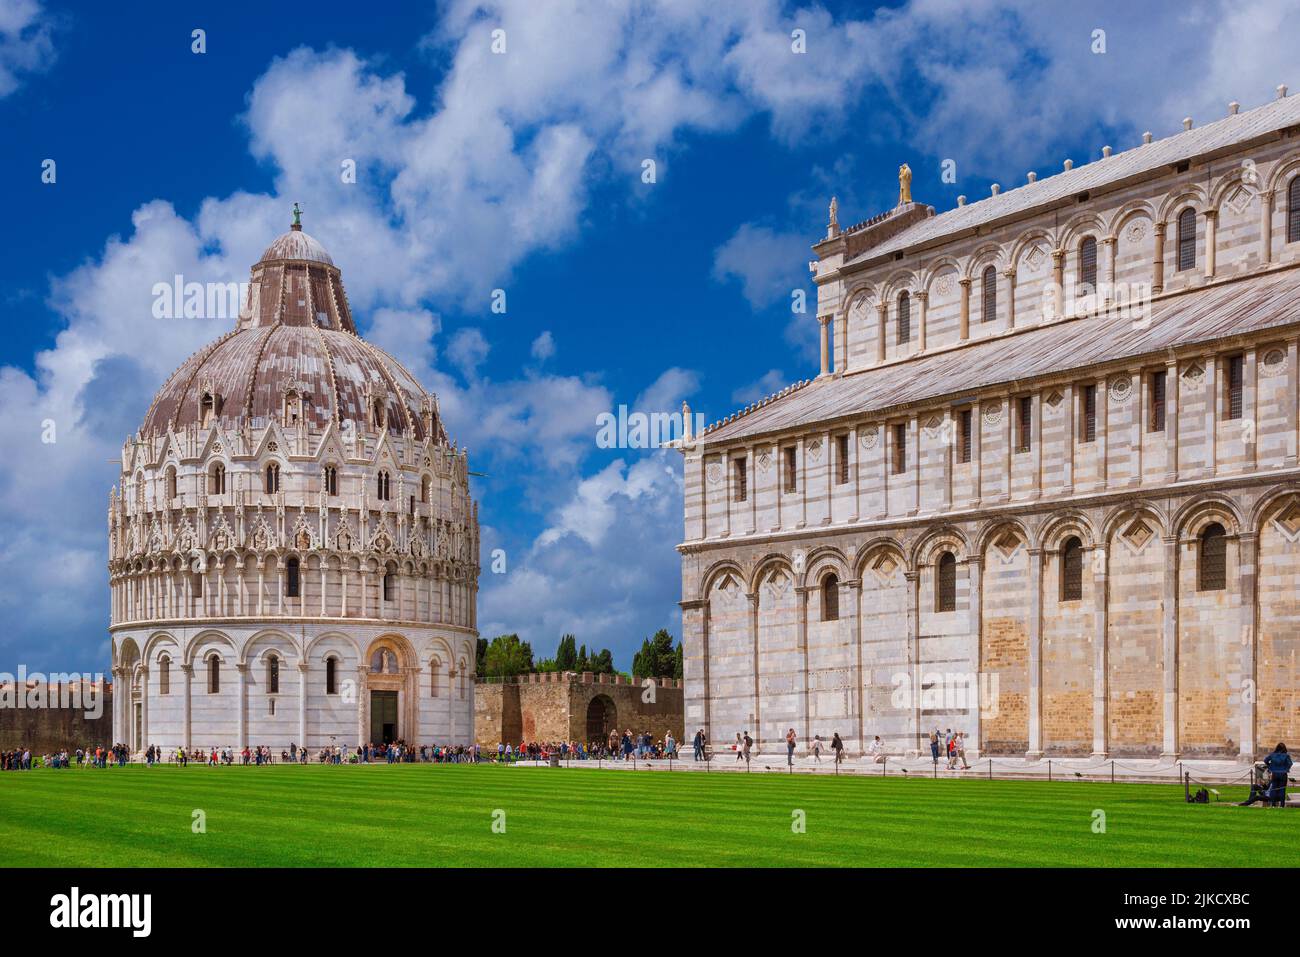 Sightseeing in Tuscany. Tourists visit the famous Campo dei Miracoli (Miracles' Square) with medieval Baptistery and Cathedral in Pisa Stock Photo